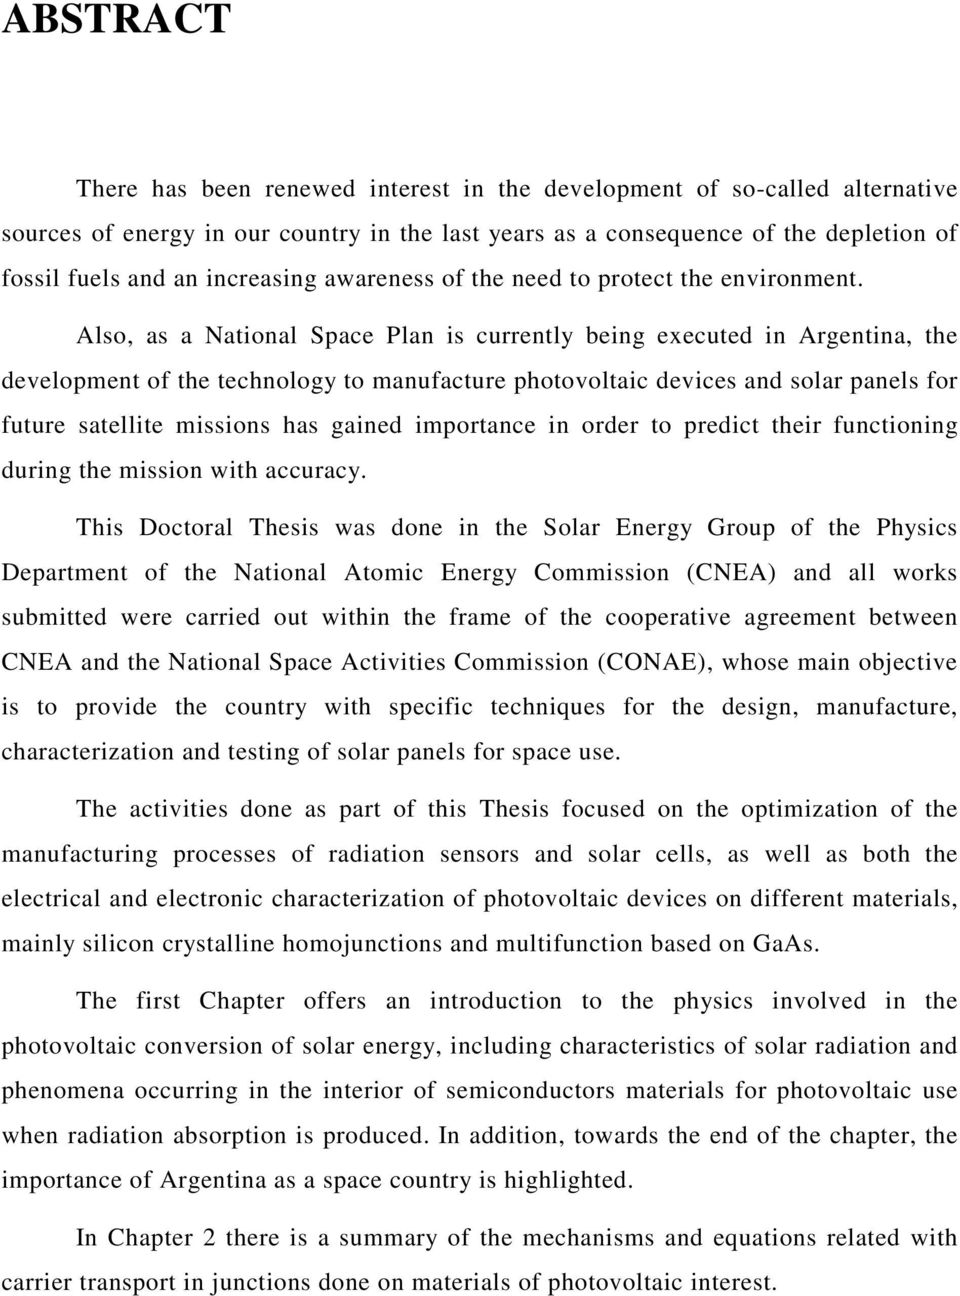 Also, as a National Space Plan is currently being executed in Argentina, the development of the technology to manufacture photovoltaic devices and solar panels for future satellite missions has